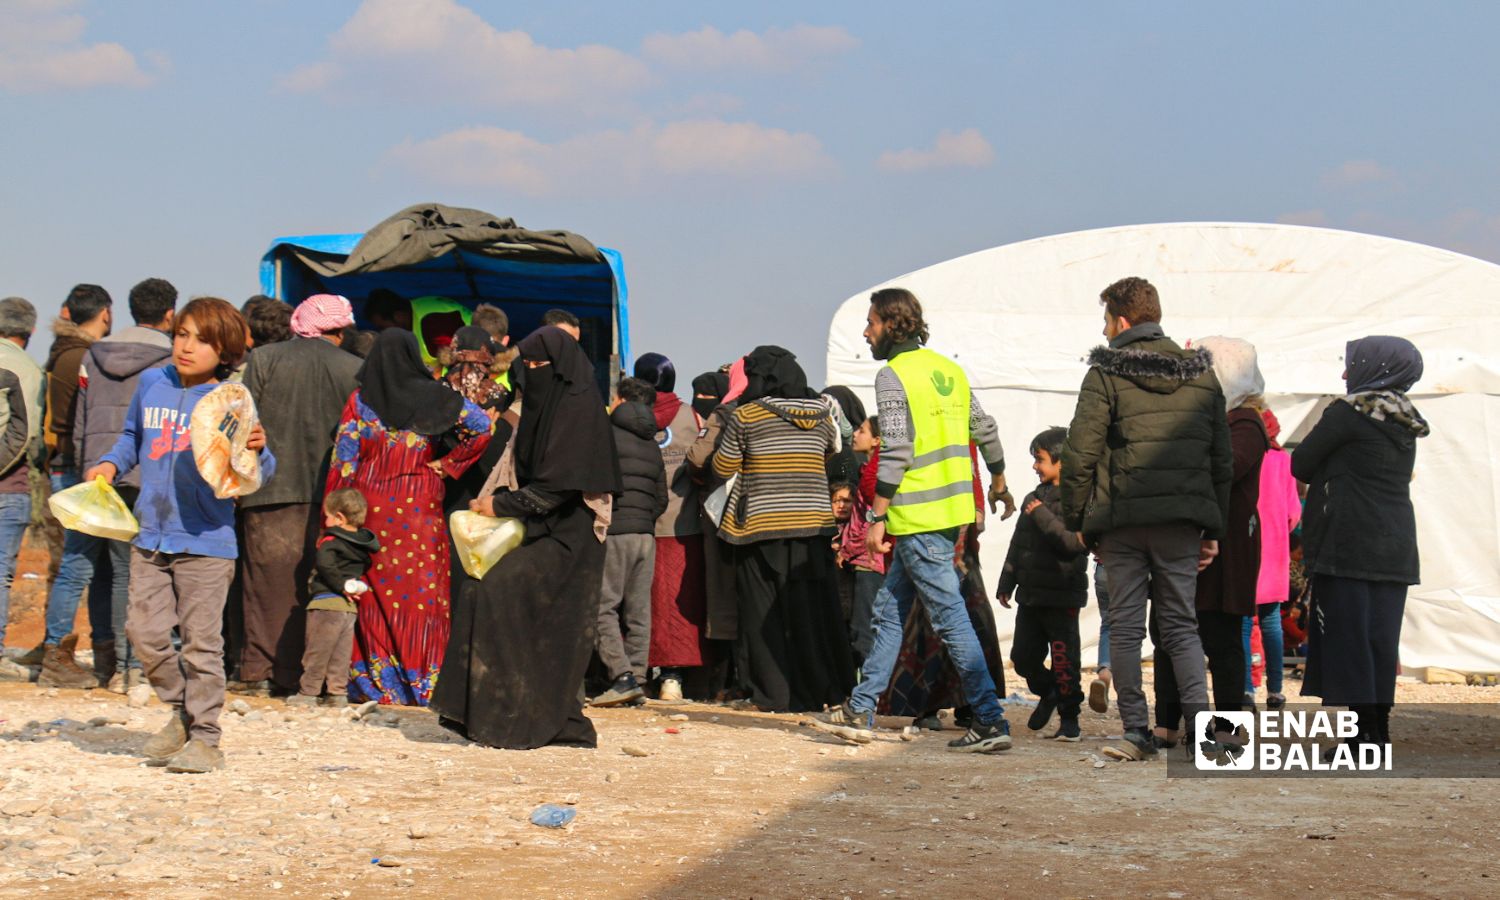 Distributing aid and food baskets to people in the town of Jindires in the northern countryside of Aleppo city who were affected by the earthquake that struck southern Turkey and northwestern Syria - February 13, 2023 (Enab Baladi/Dayan Junpaz)